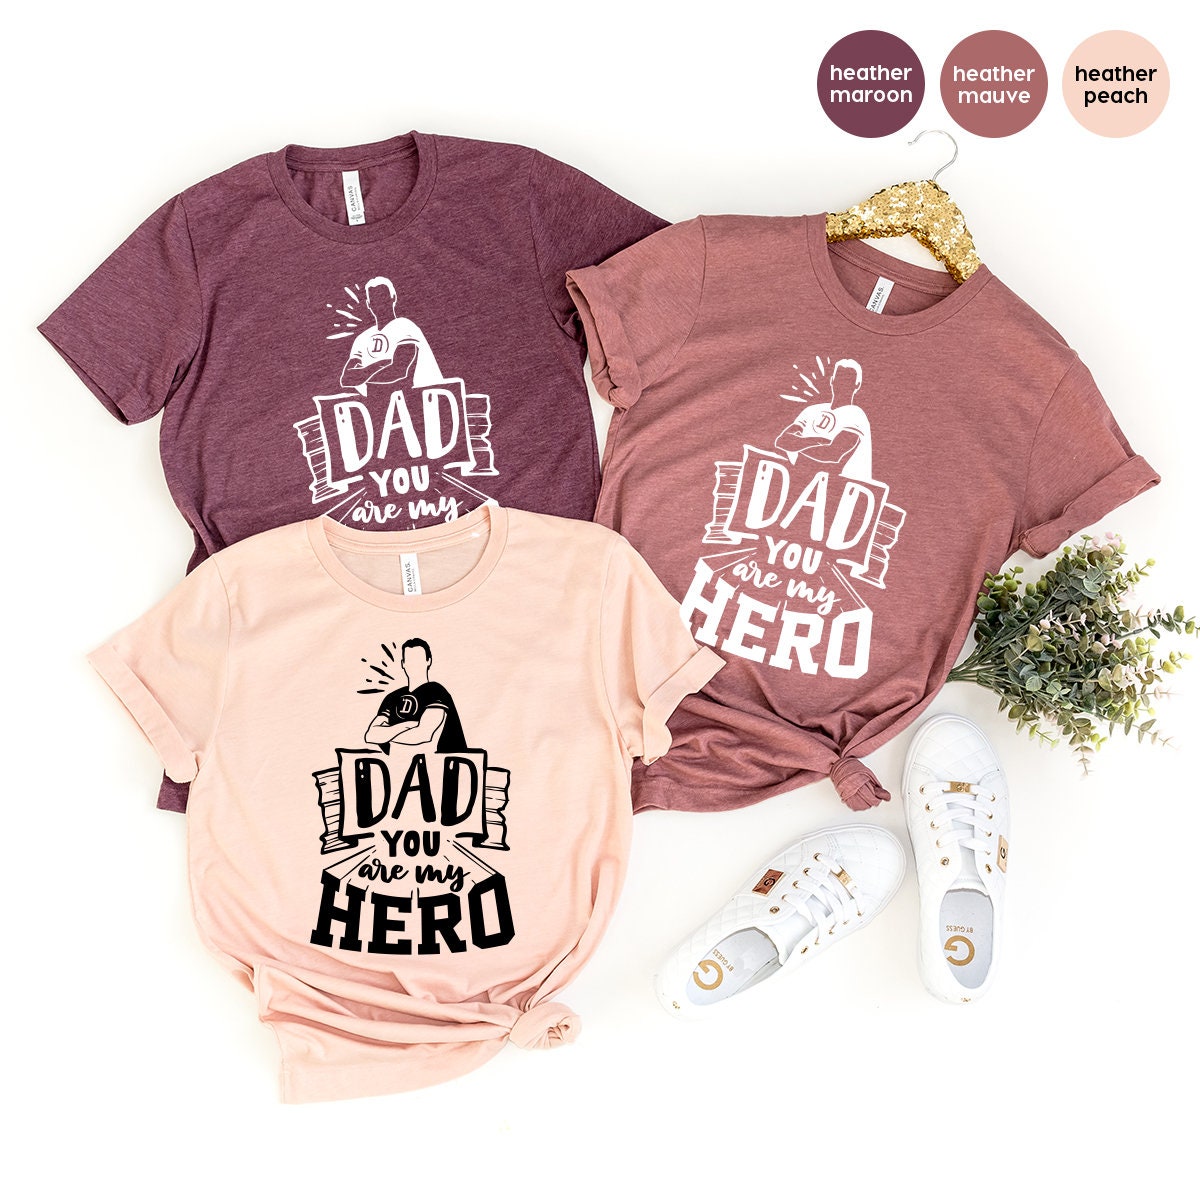 Dad Shirt, Daddy T Shirt, Dad You Are My Hero Shirt, Best Dad Ever T-Shirt, Gift For Dad, Funny Dad Shirt, Fatherhood Shirt, Dad Gift - Fastdeliverytees.com